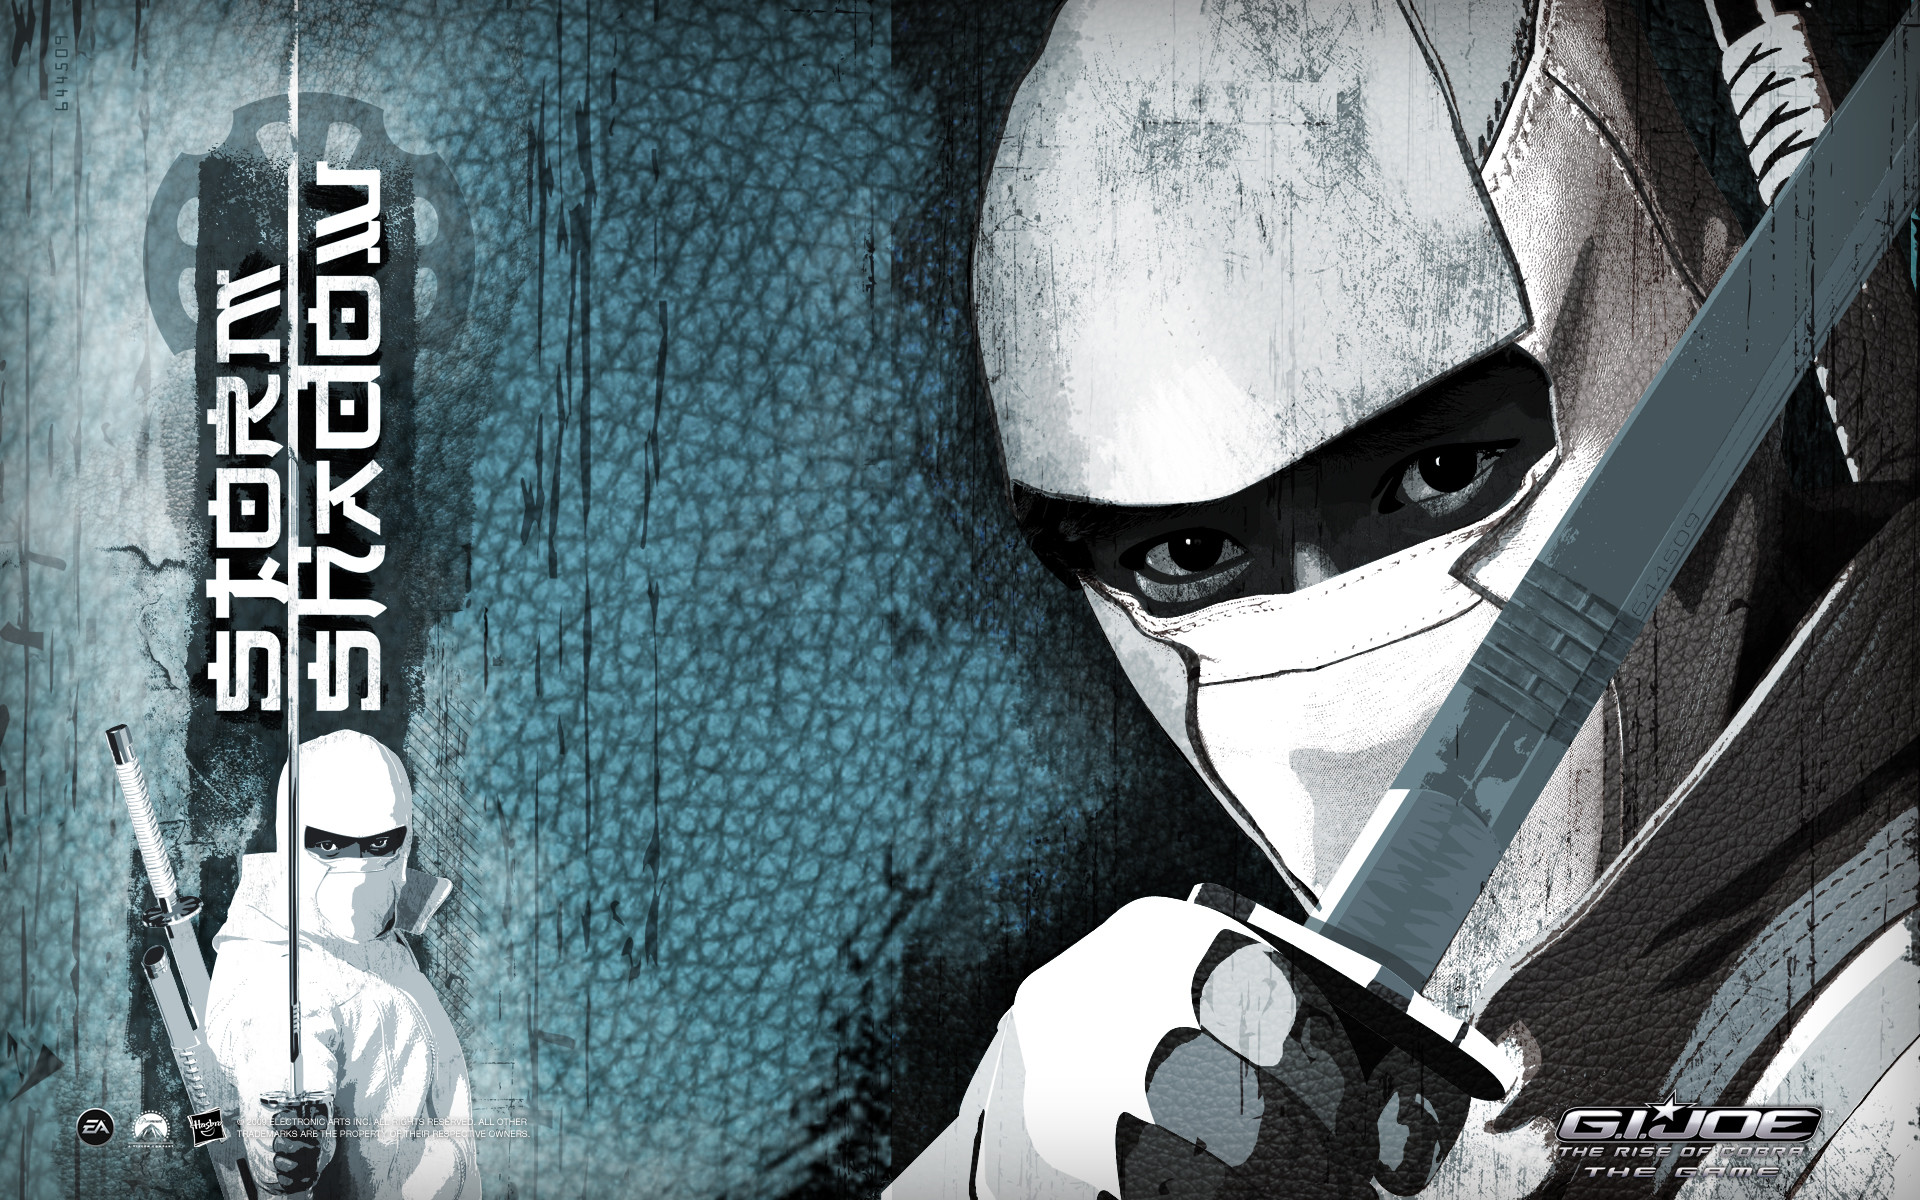 1920x1200 Storm Shadow G.I Joe Movie | Download HD Wallpapers Photos 0 HTML code.  www.thewallpapers.org